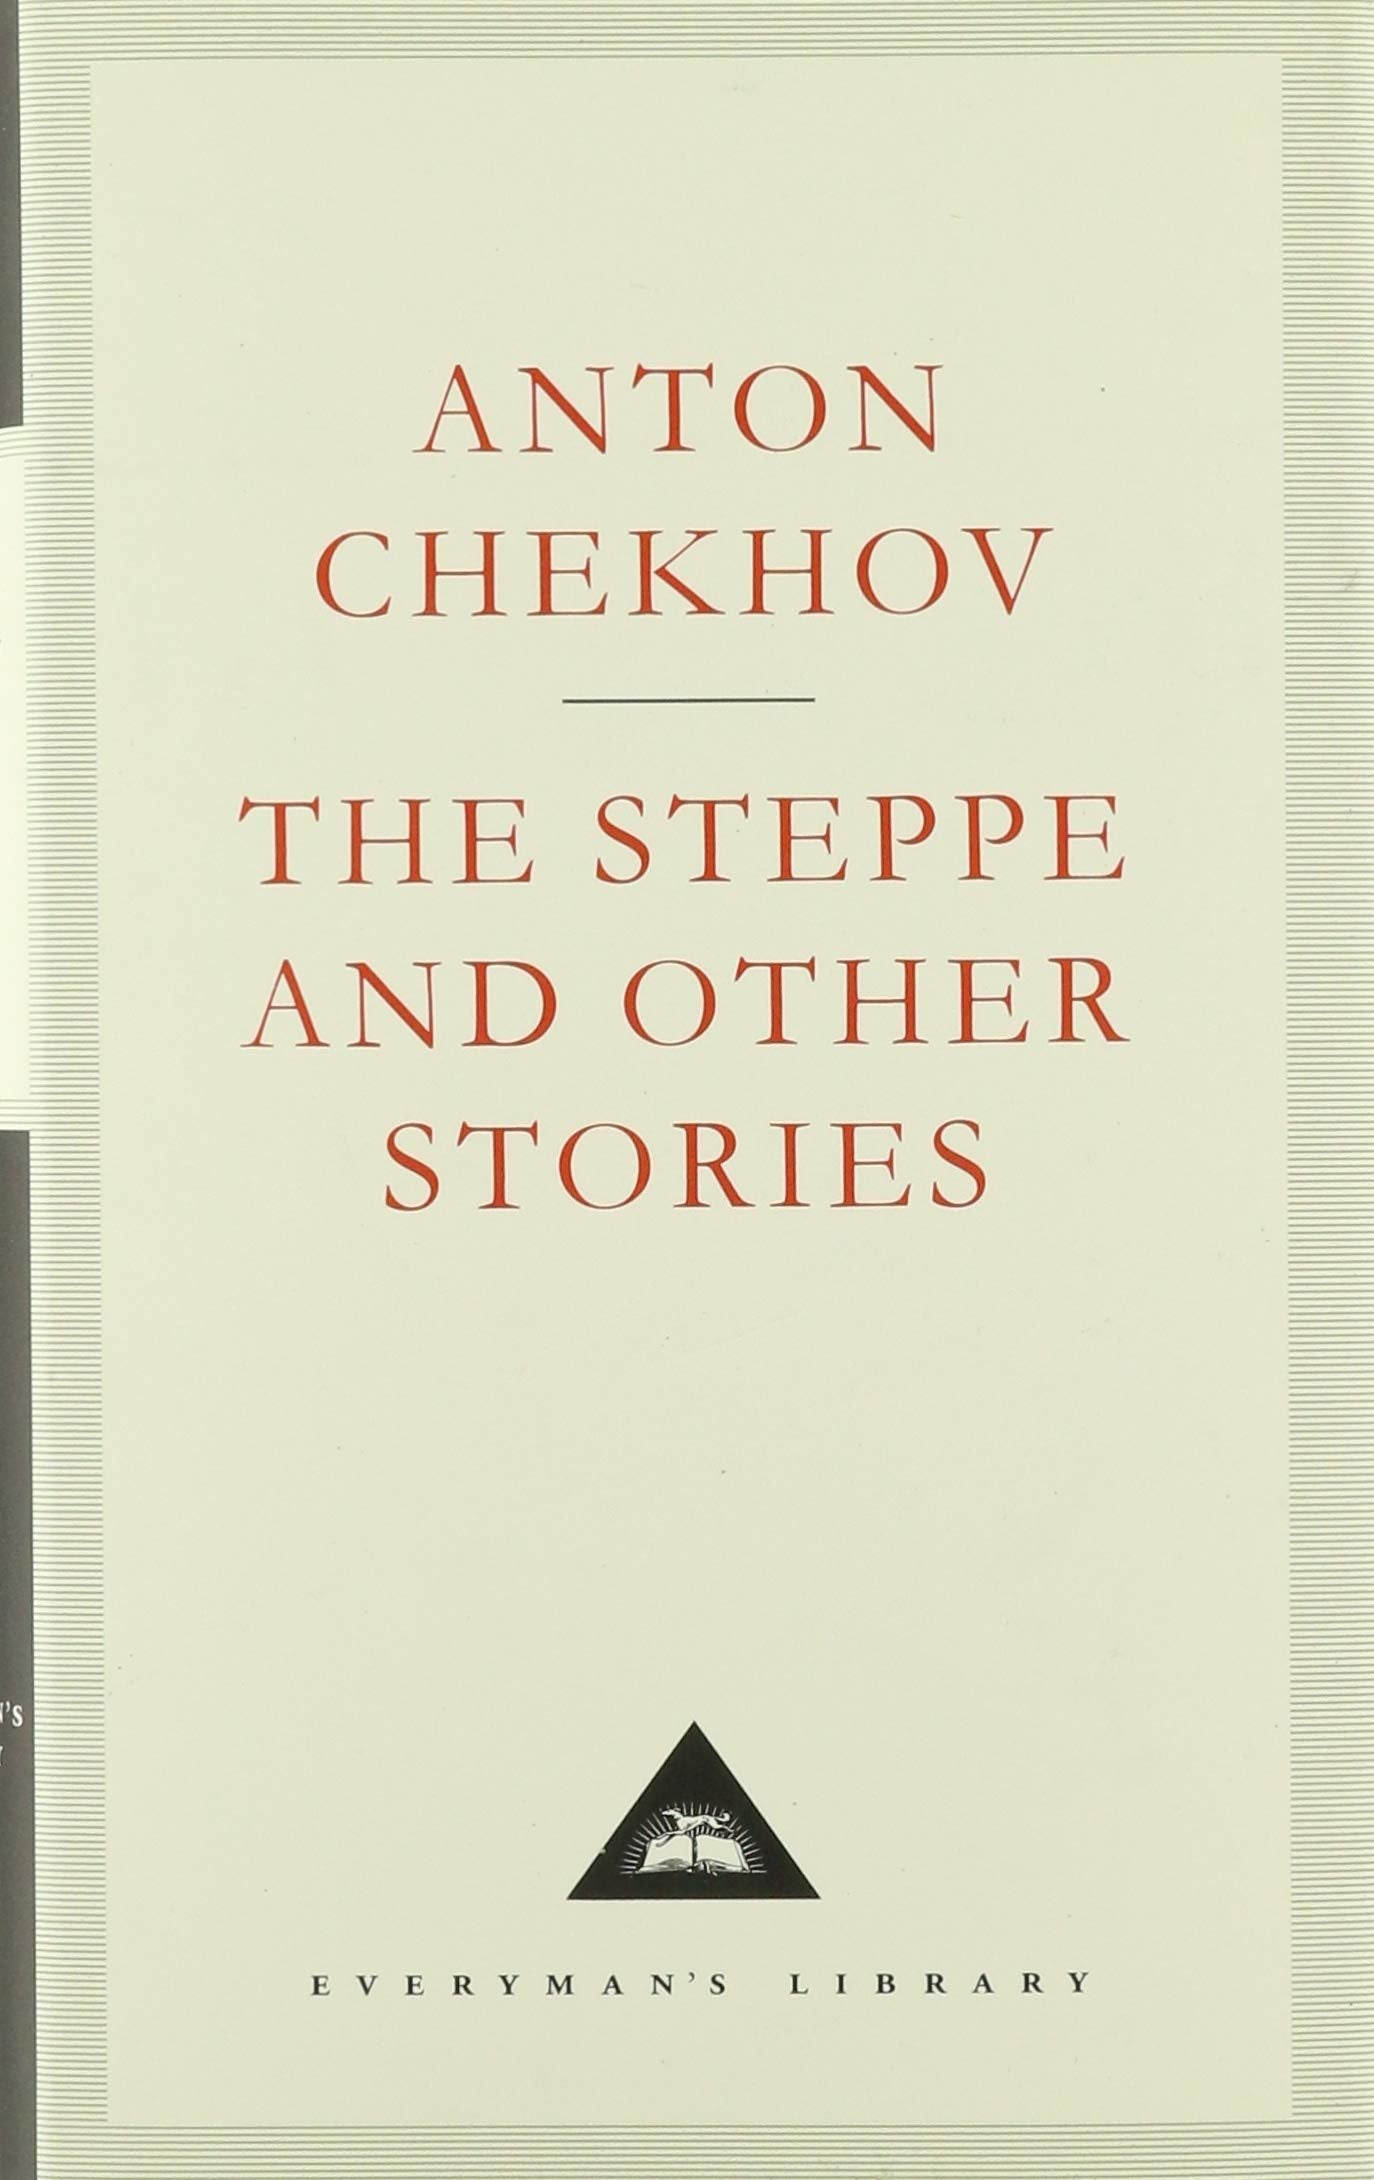 The Steppe and Other Stories